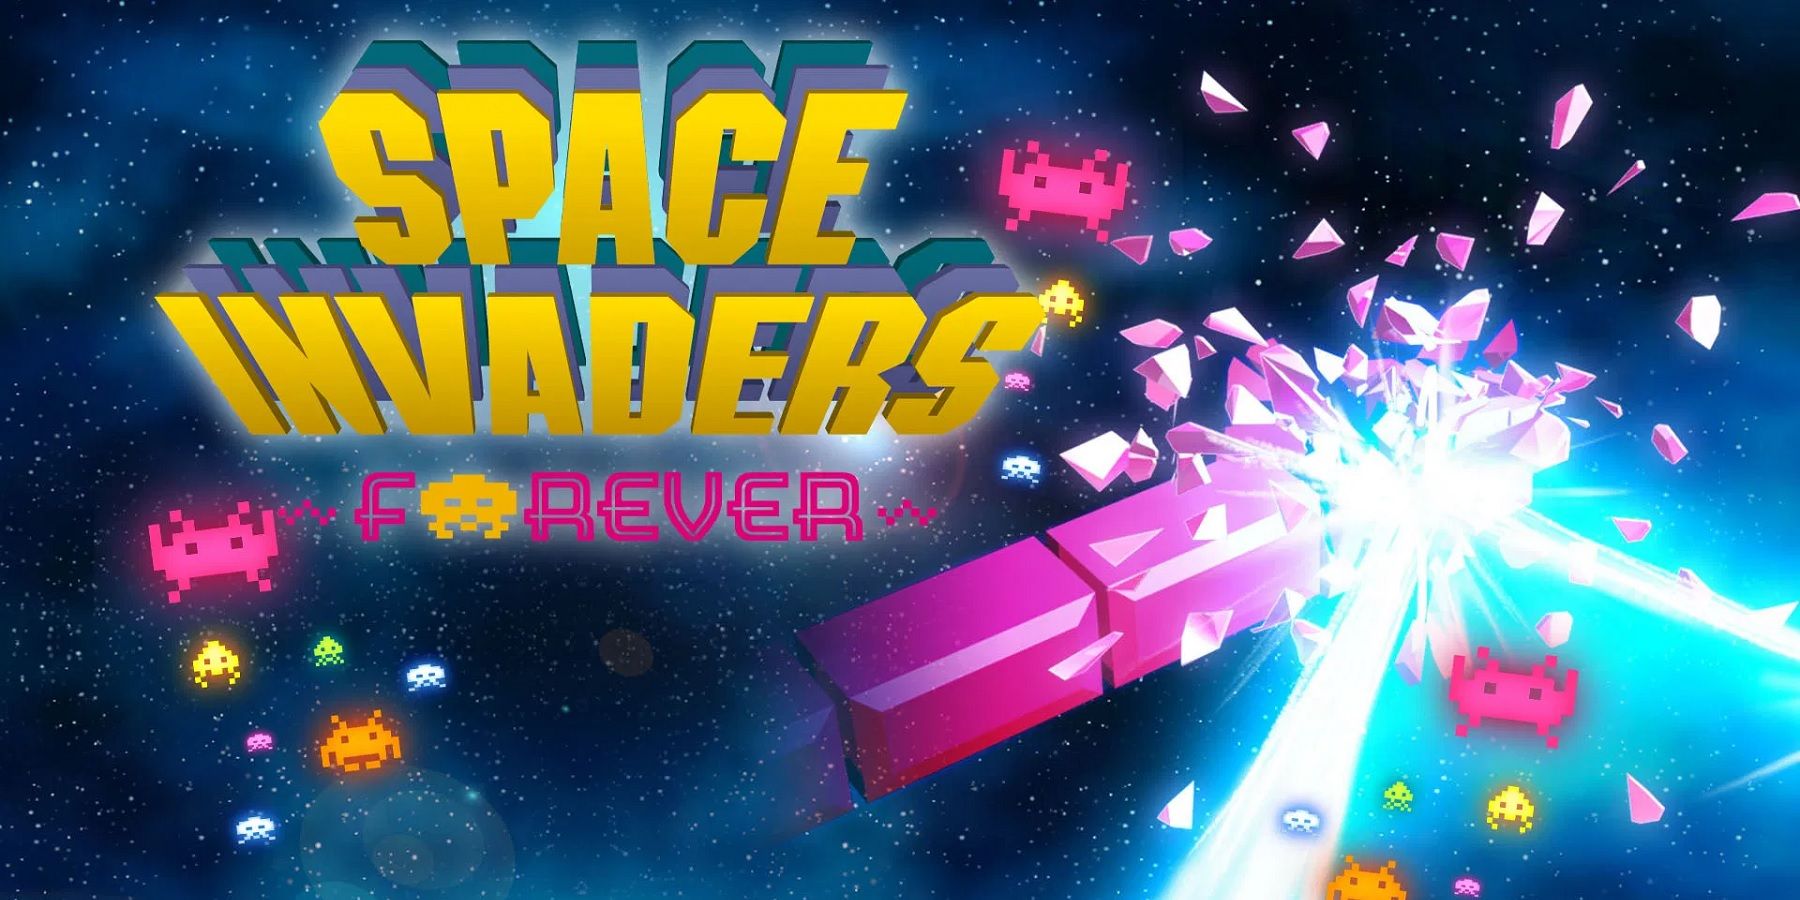 The logog and title screen for Space Invaders Forever on Nintendo Switch.